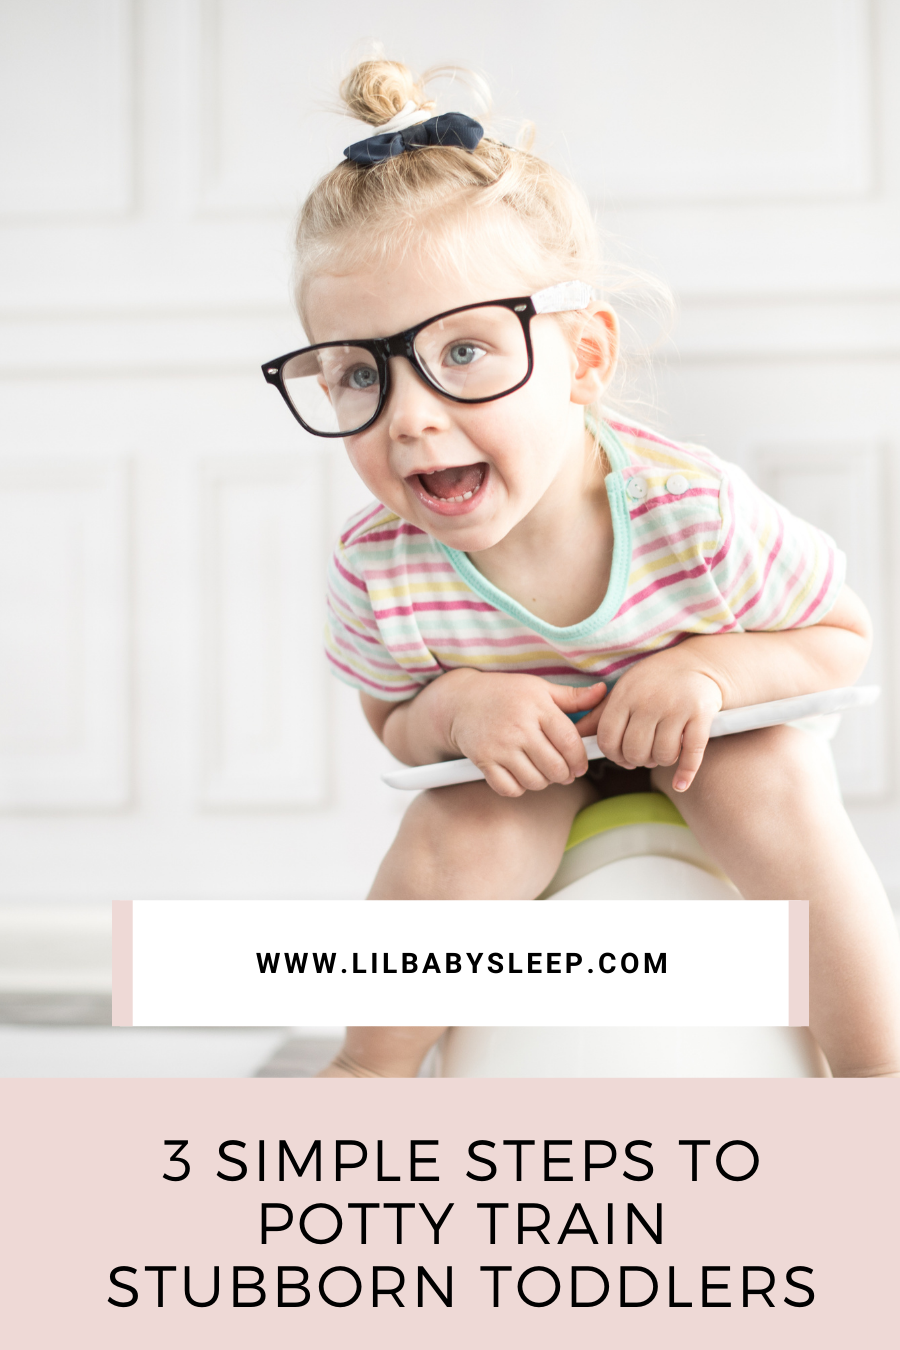 3 Simple Steps to Potty Train Stubborn Toddlers! — Lil Baby Sleep